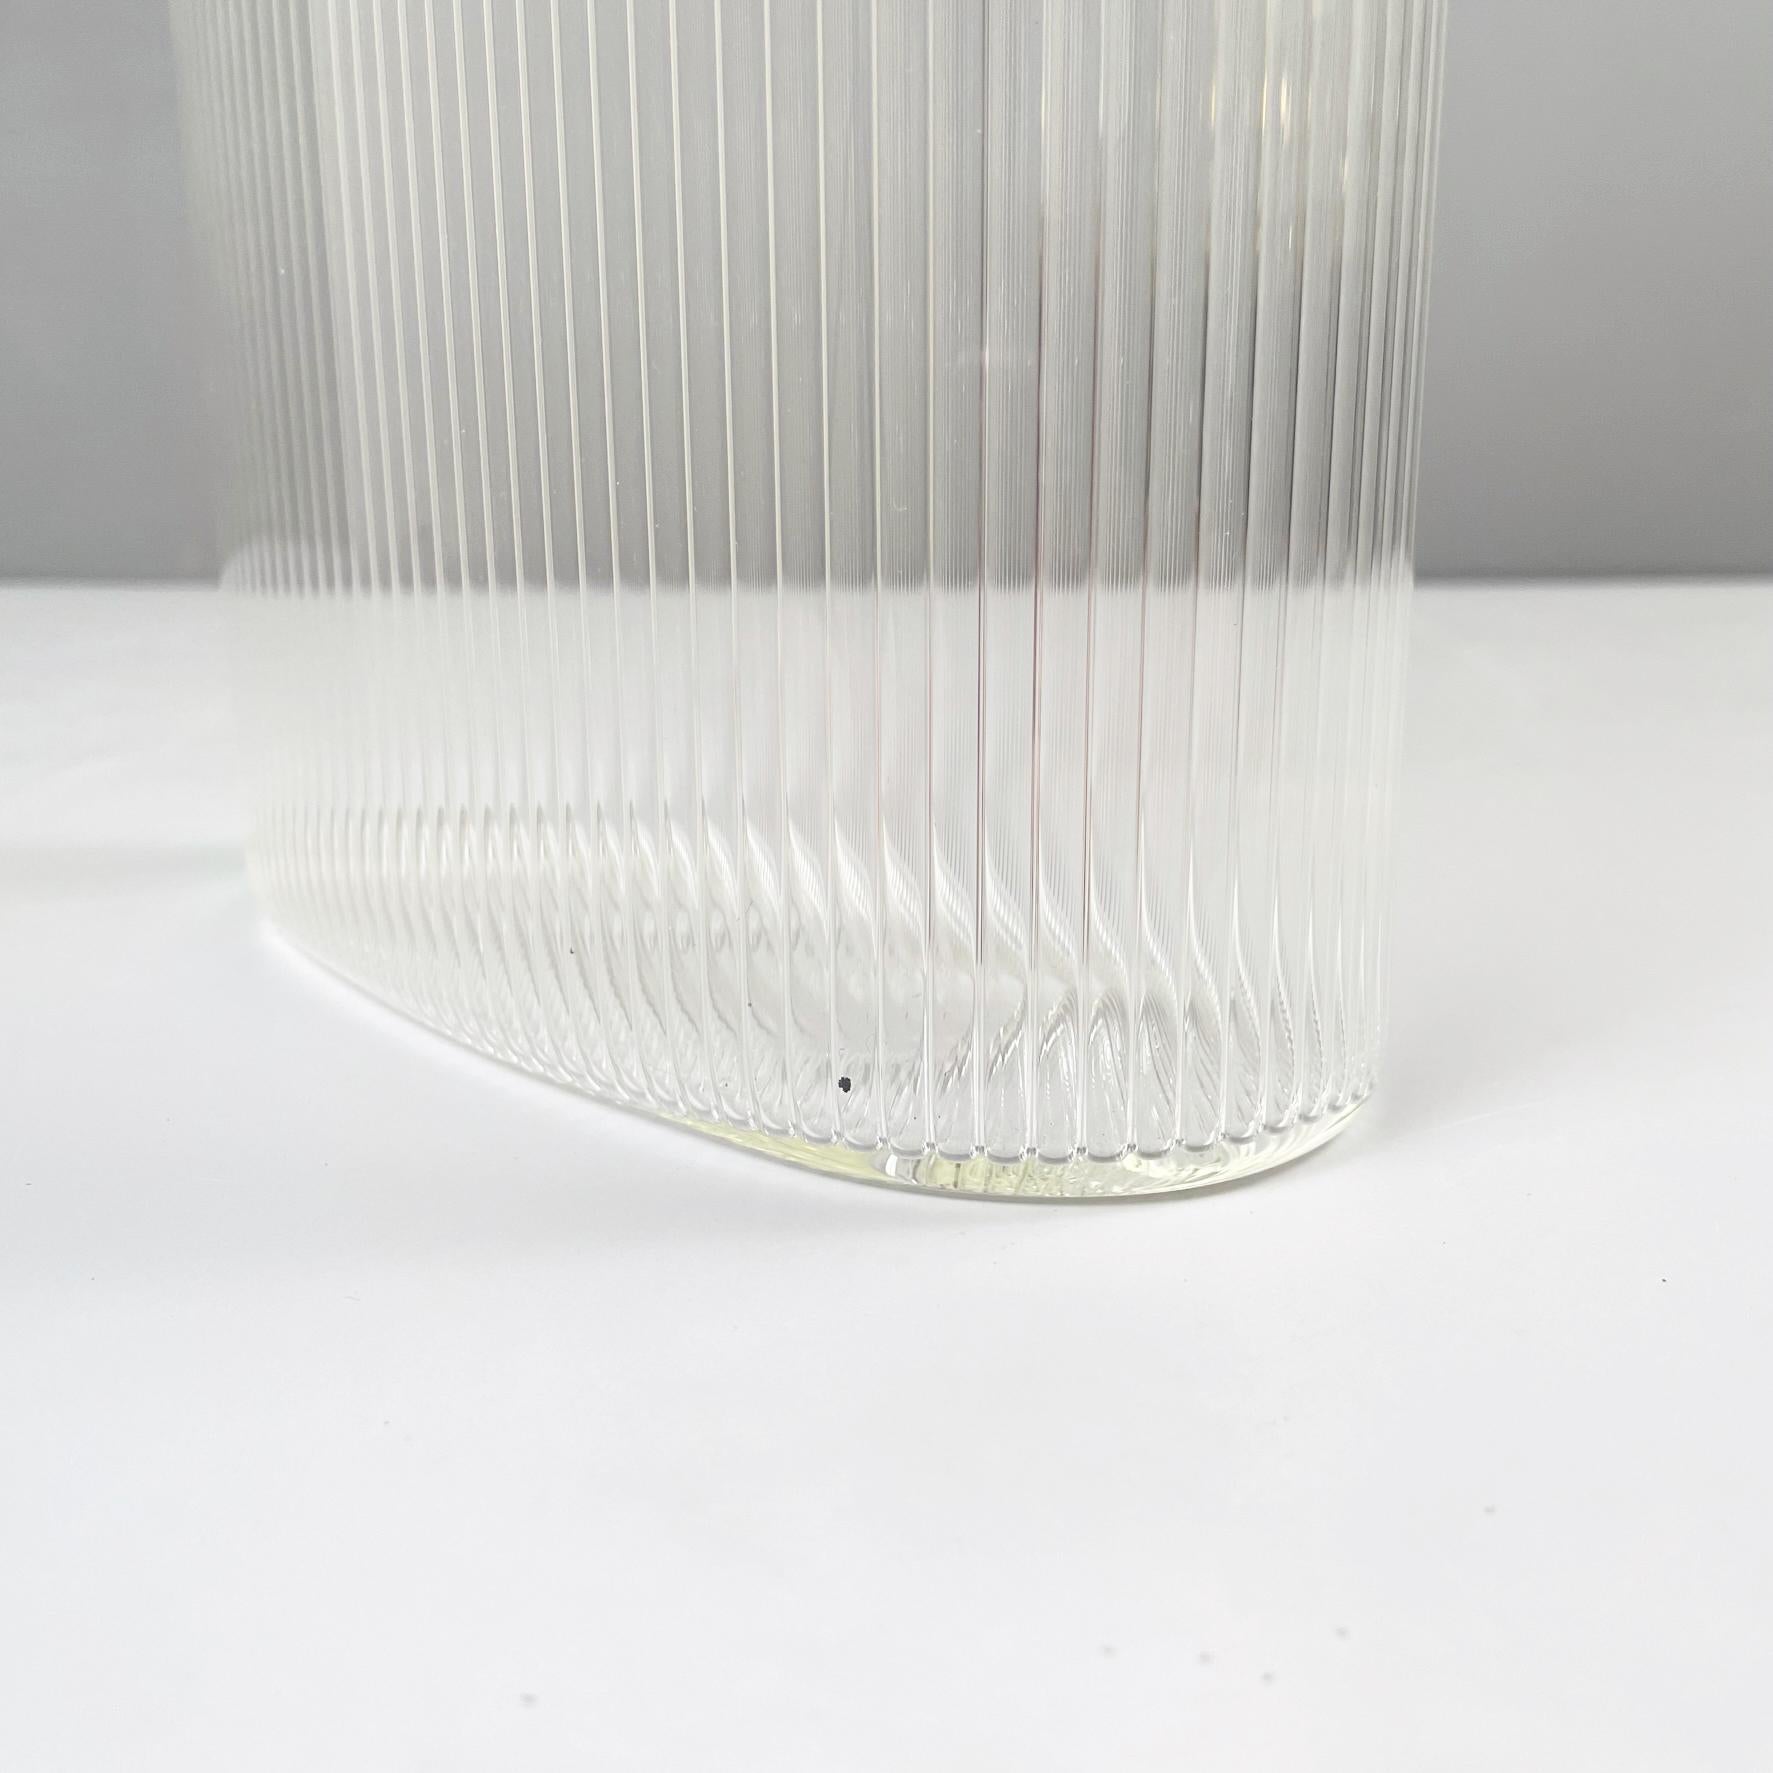 Italian modern Glass vase with oval shape by Roberto Faccioli, 1990s For Sale 3